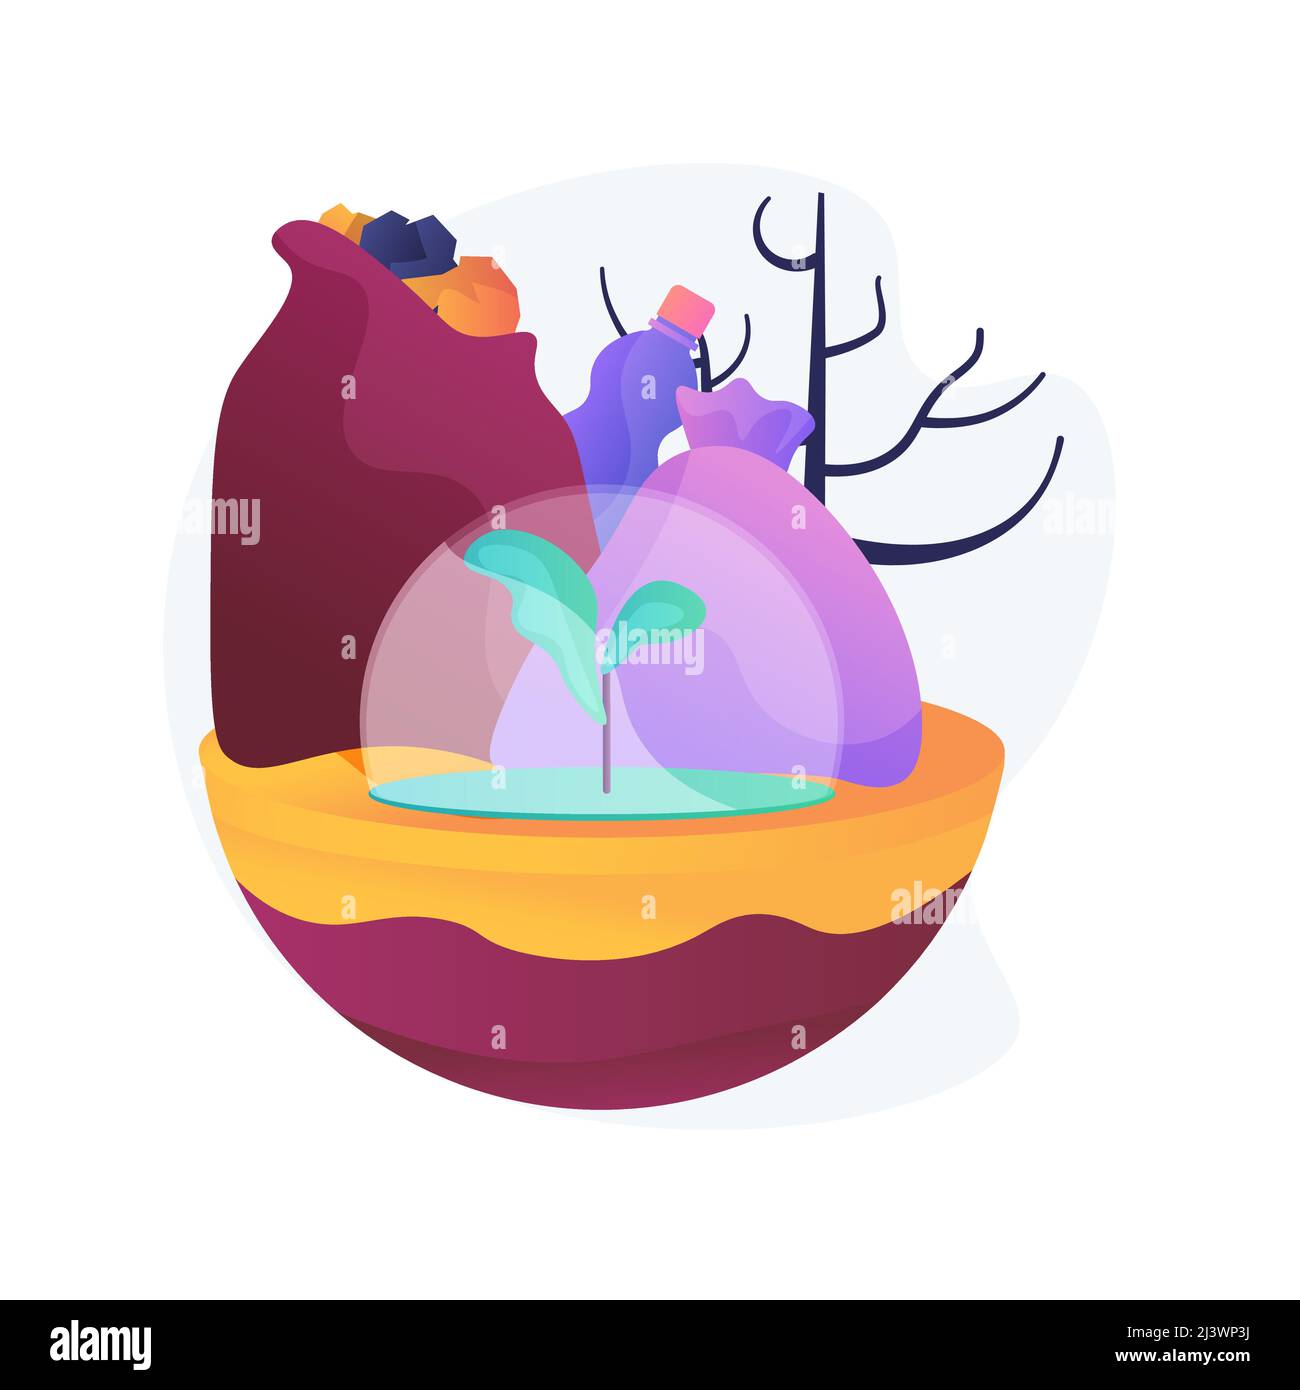 Soil pollution abstract concept vector illustration. Land degradation, groundwater pollution, soil contamination, agricultural chemical products, toxi Stock Vector